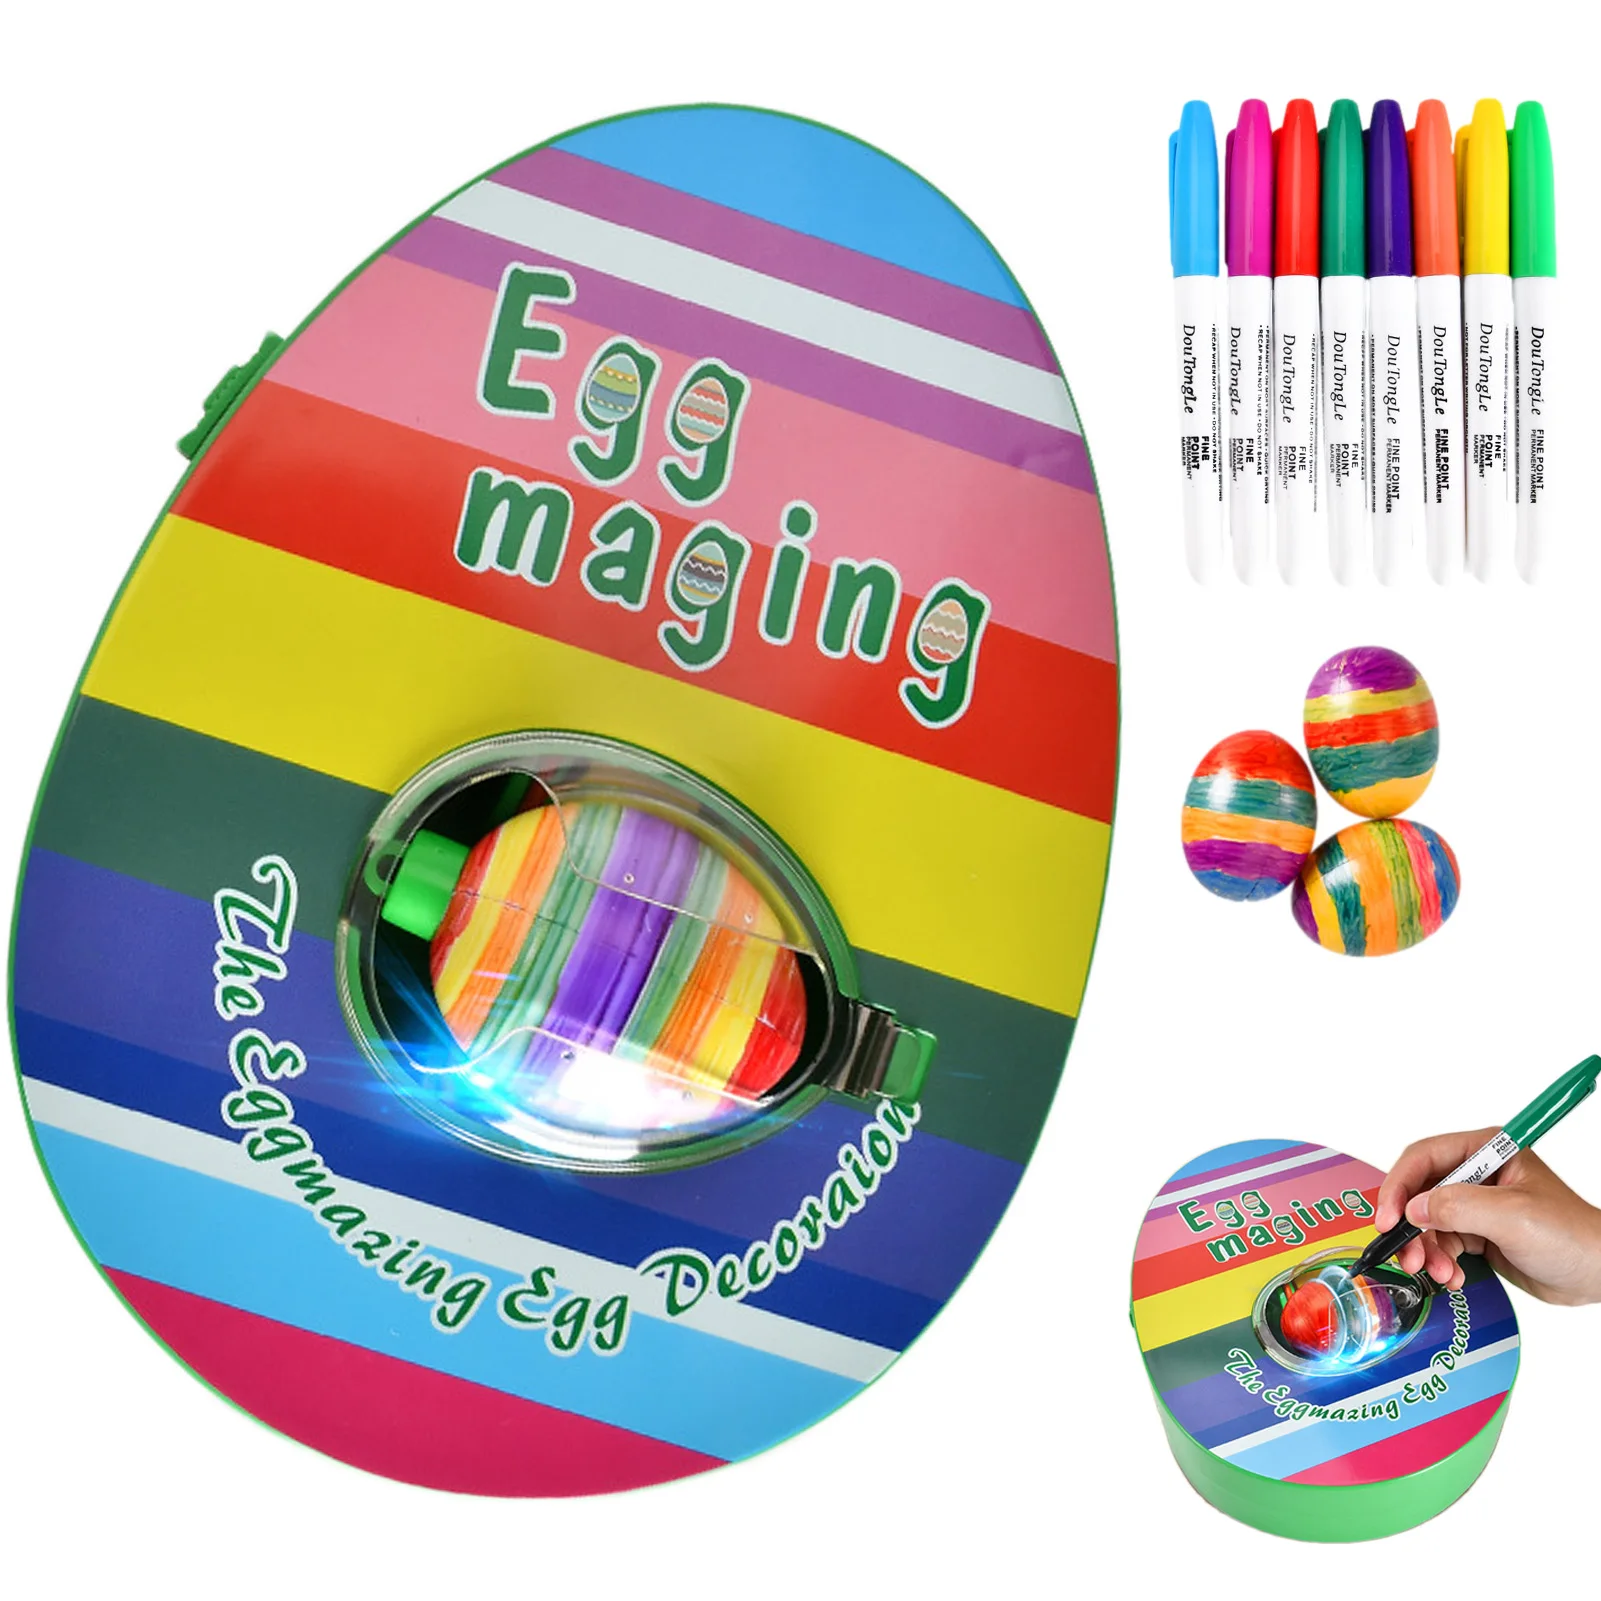 

Easter Eggs The Original Motorized Egg Mazing Egg Spinner Machine With 8 Colors DIY Easter Eggs Gift Present For Kids Toddlers